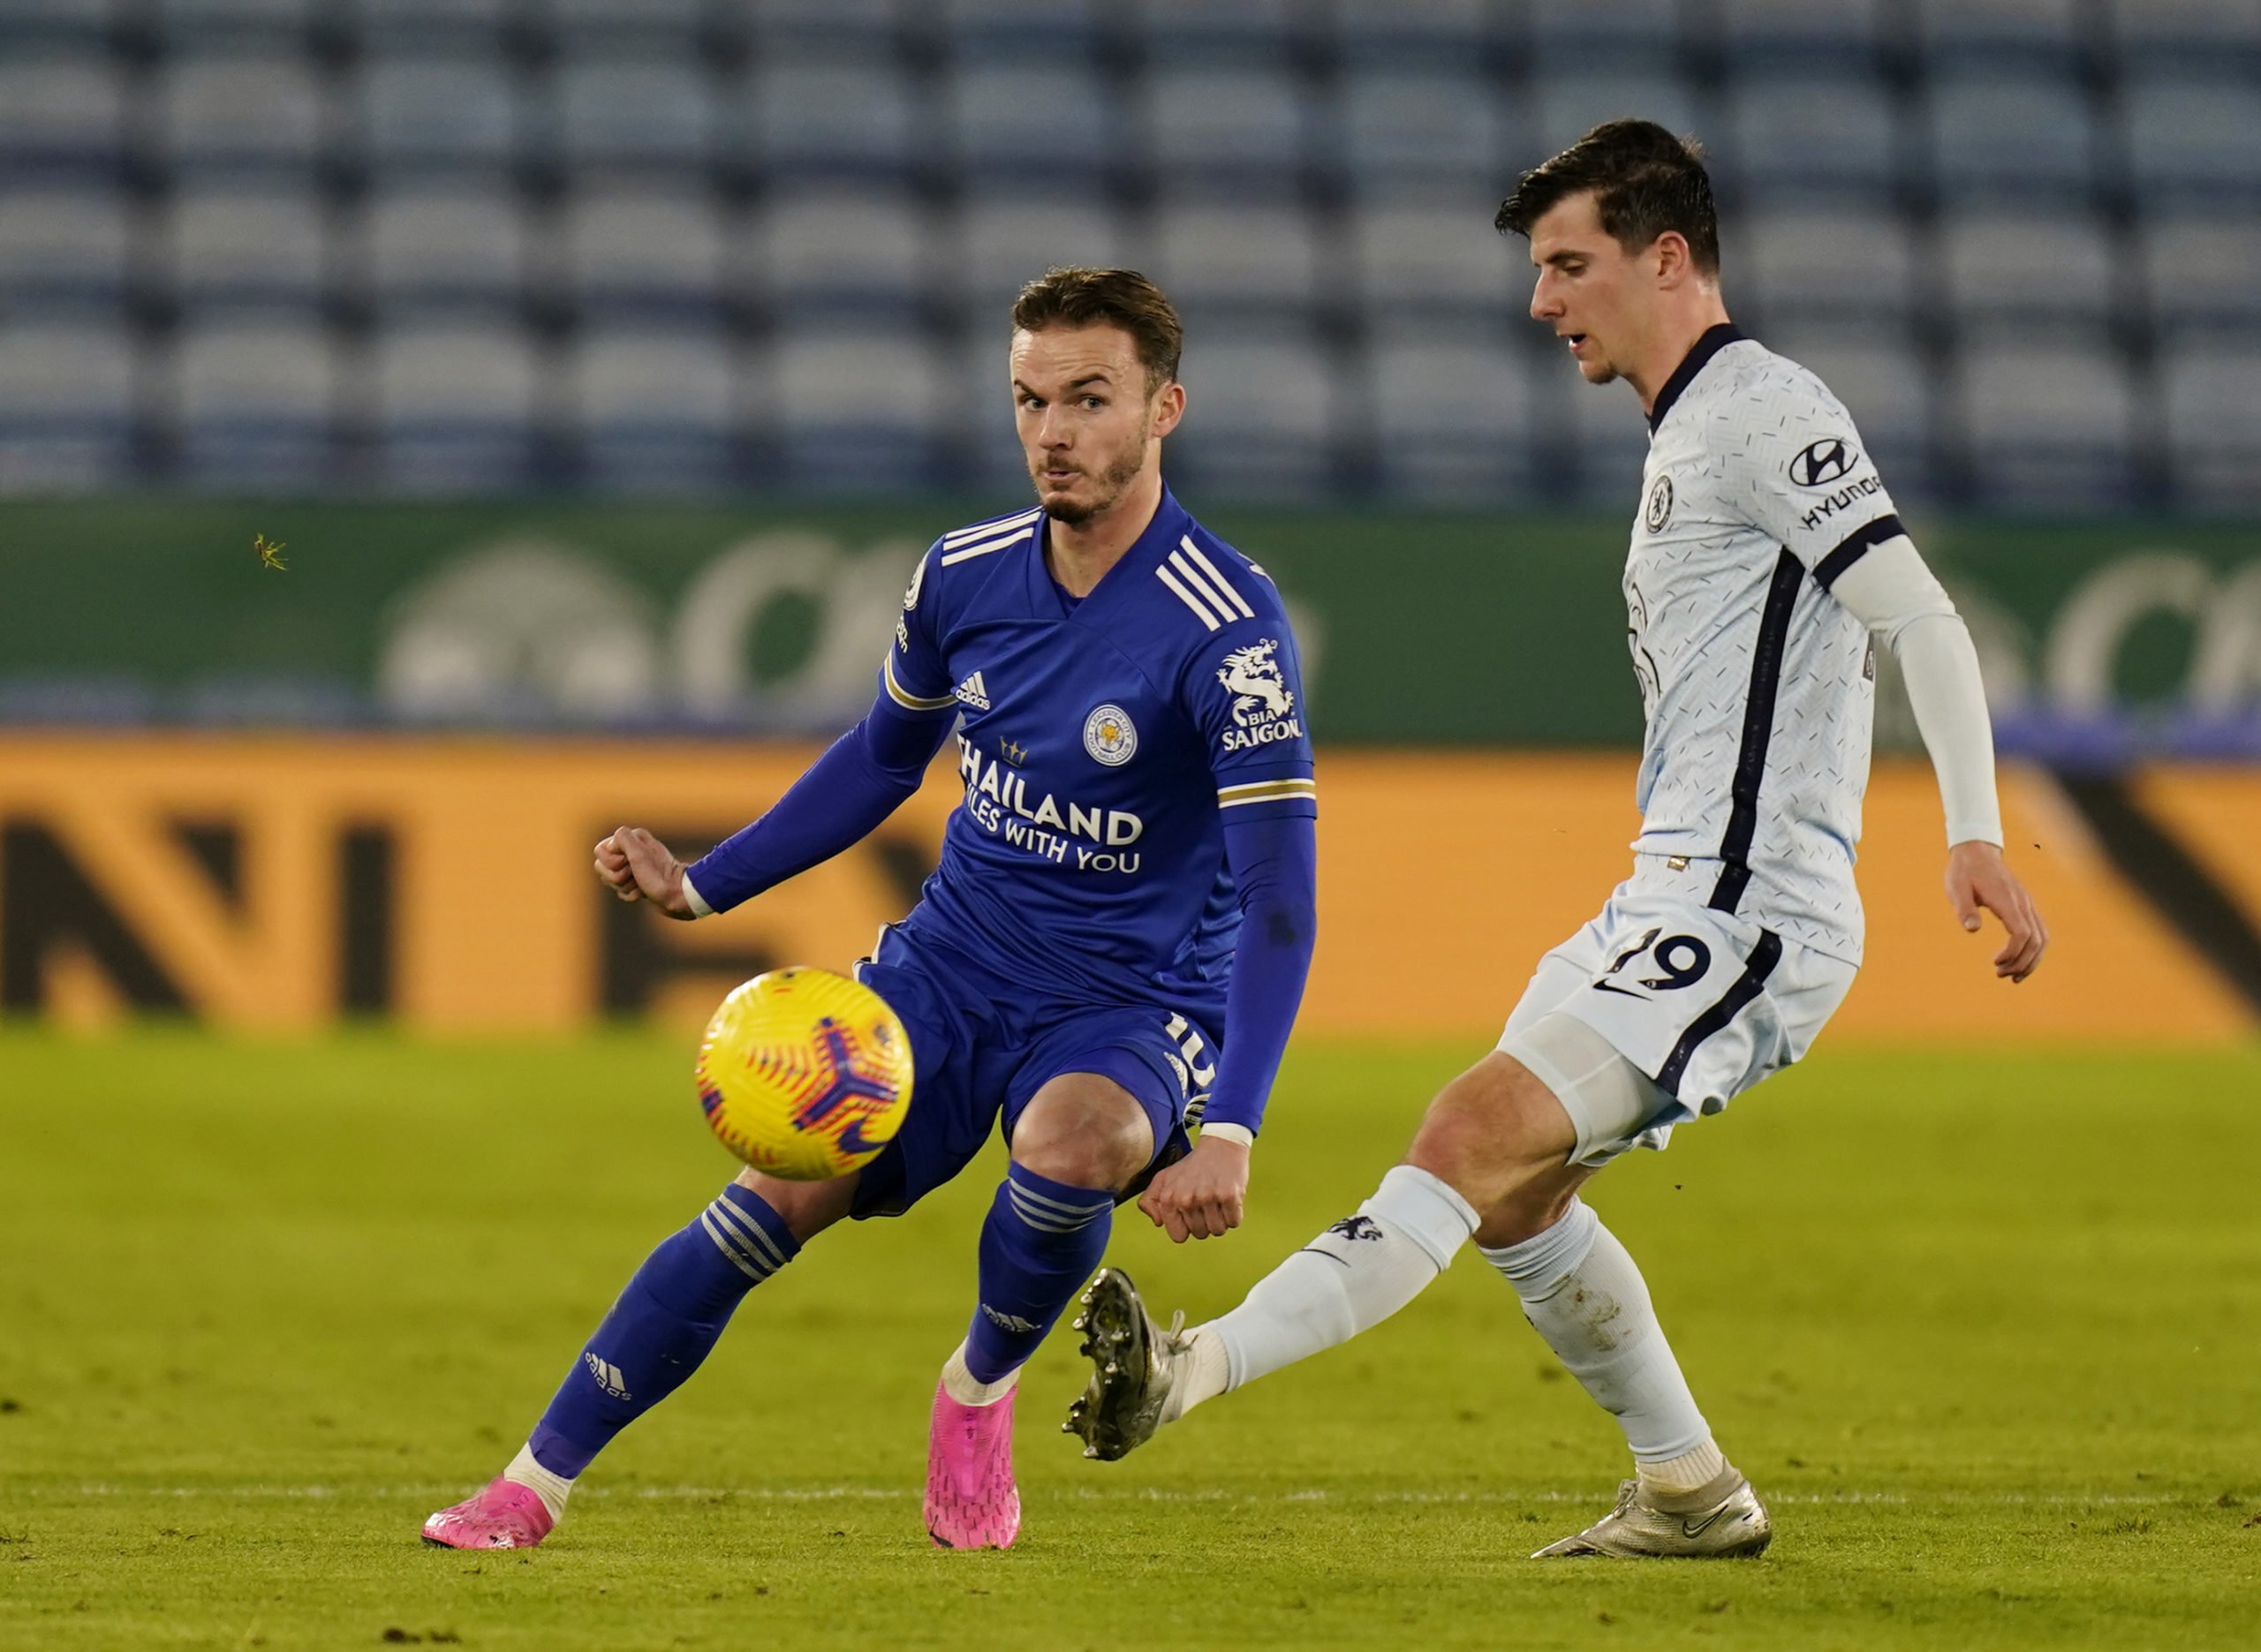 LEICESTER, ENGLAND - JANUARY 19: James Maddison of Leicester City looks to break past Mason Mount of Chelsea during the Premier League match between Leicester City and Chelsea at The King Power Stadium on January 19, 2021 in Leicester, England. Sporting stadiums around the UK remain under strict restrictions due to the Coronavirus Pandemic as Government social distancing laws prohibit fans inside venues resulting in games being played behind closed doors. (Photo by Tim Keeton - Pool/Getty Images)The 4th Official uses images provided by the following image agency: Getty Images (https://www.gettyimages.de/) Imago Images (https://www.imago-images.de/)